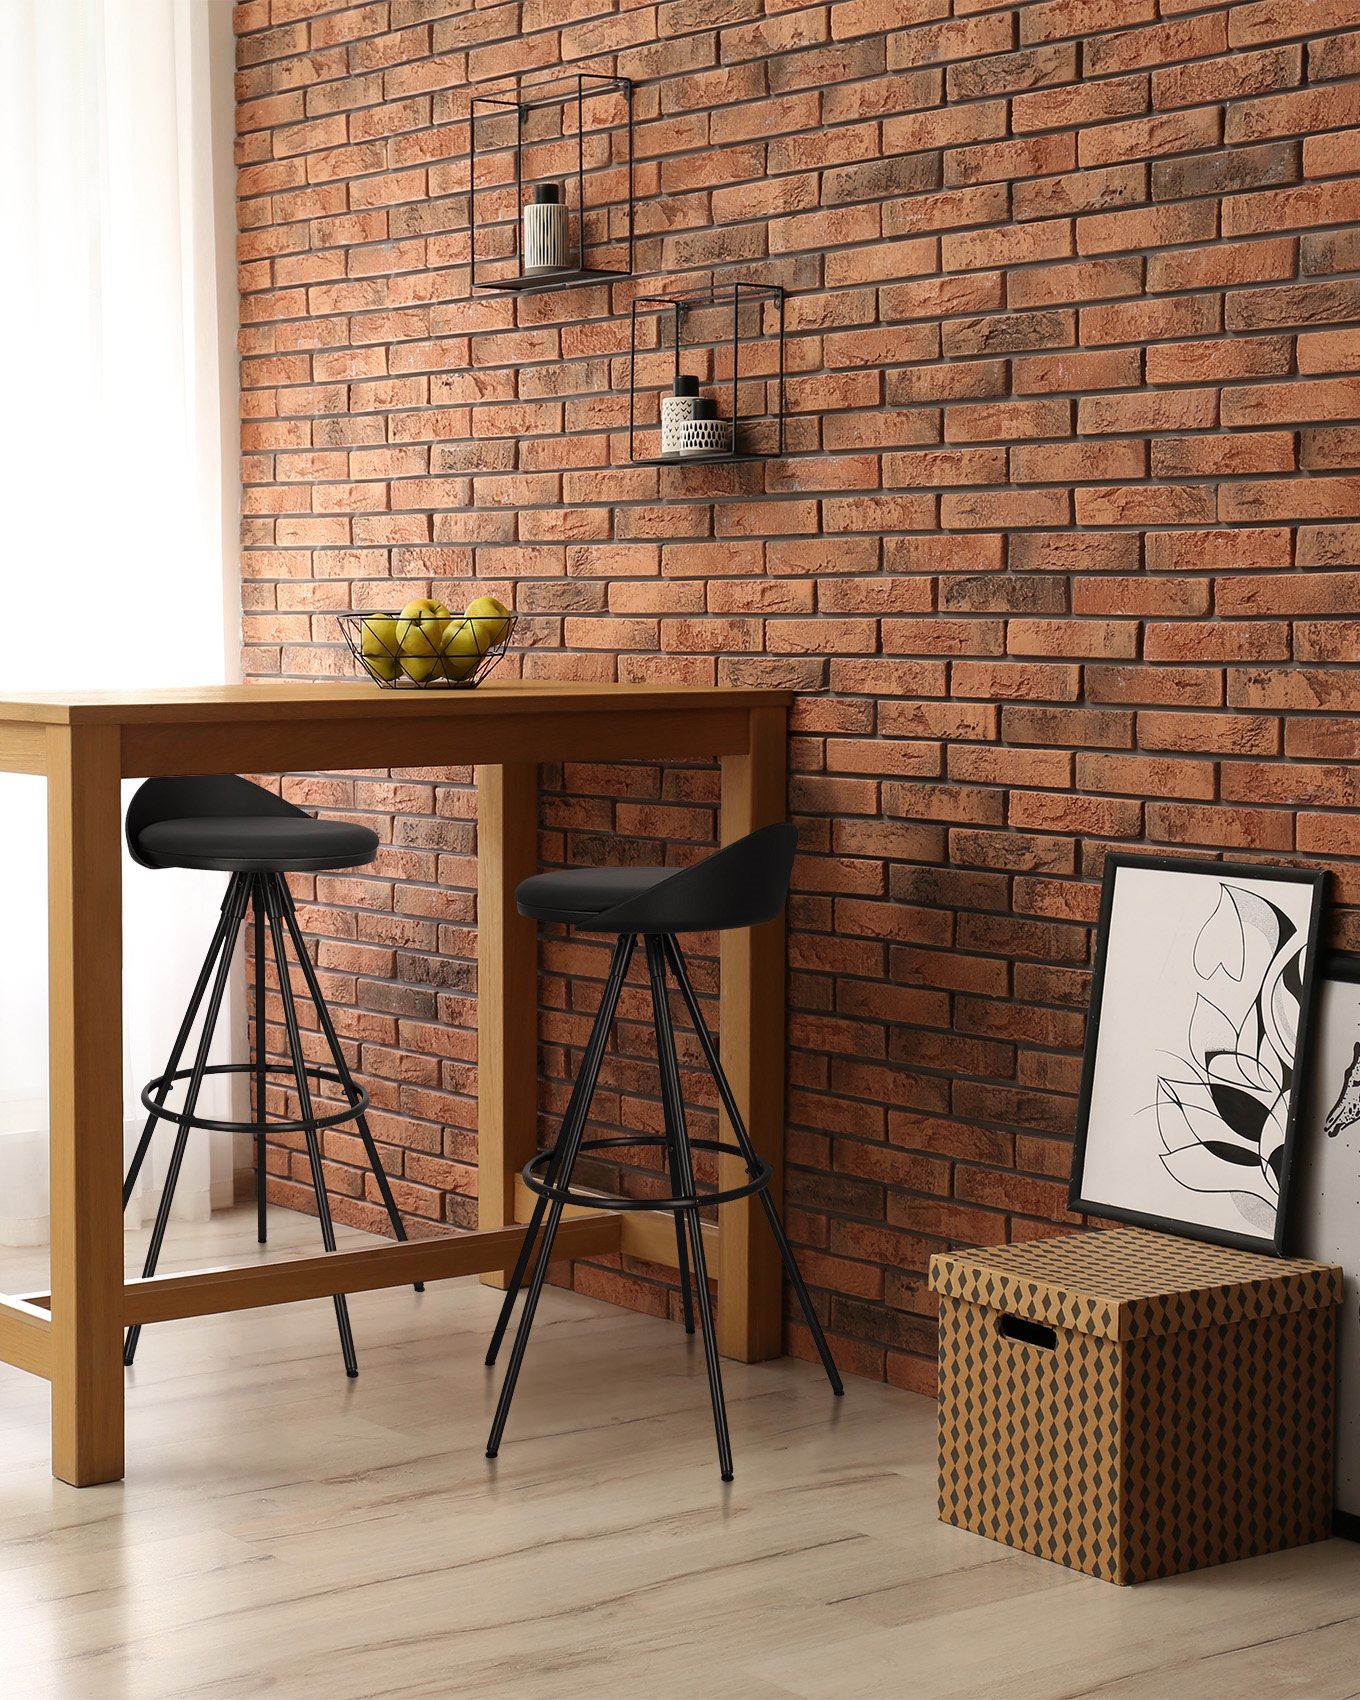 Elegant room interior with wooden table near brick wall